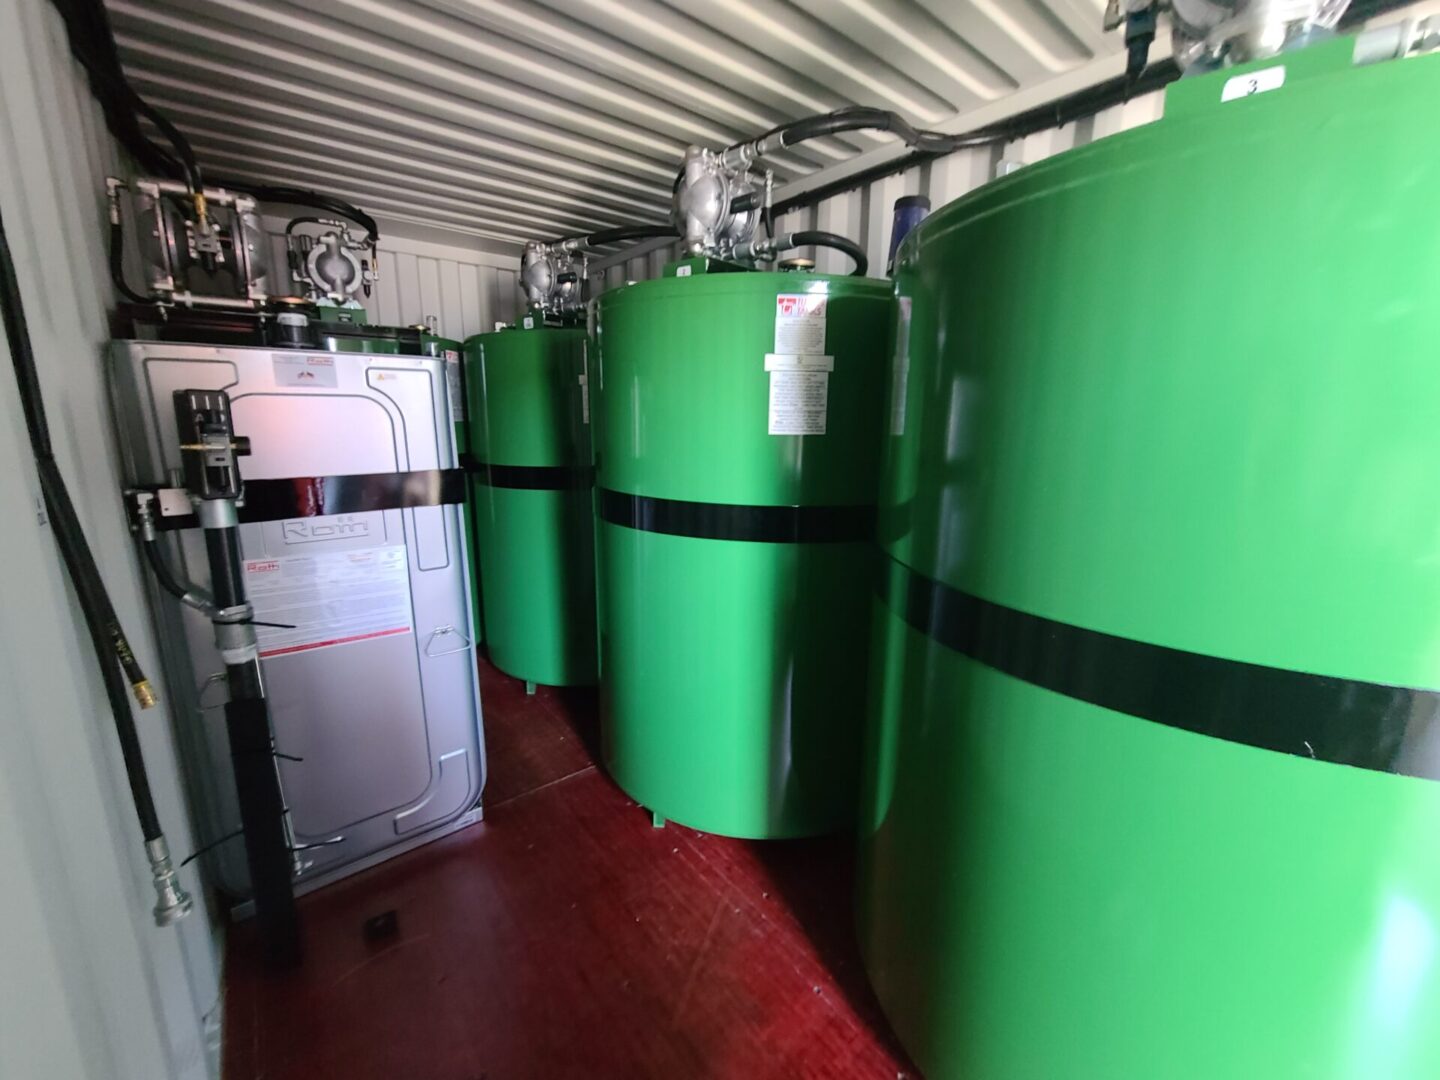 A group of green tanks sitting in a room.